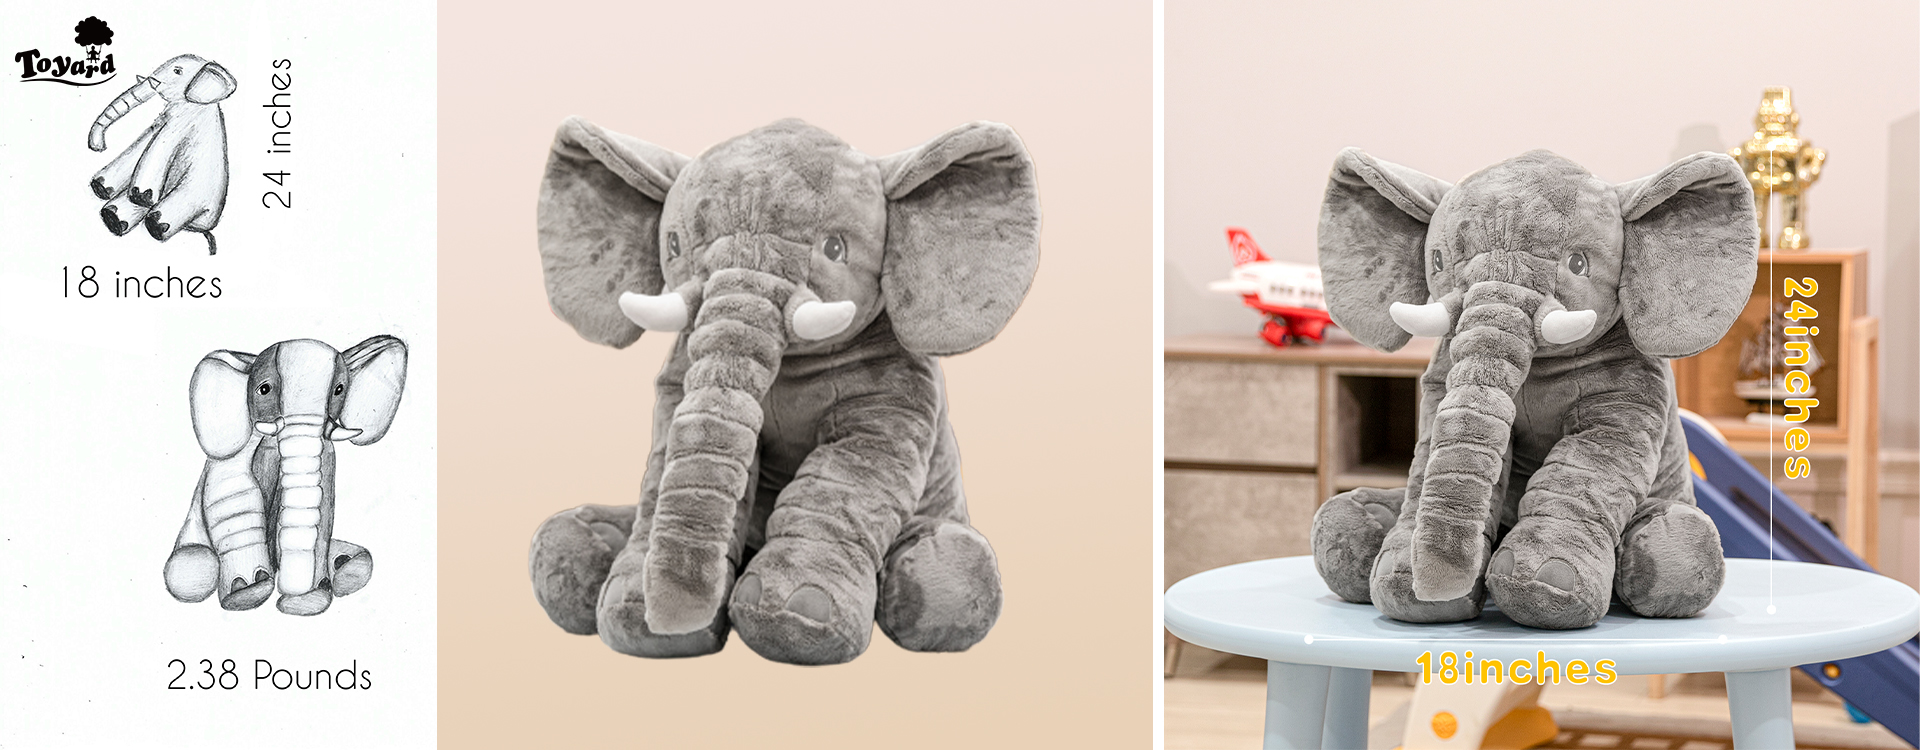 soft elephant toy from sketch to finished product